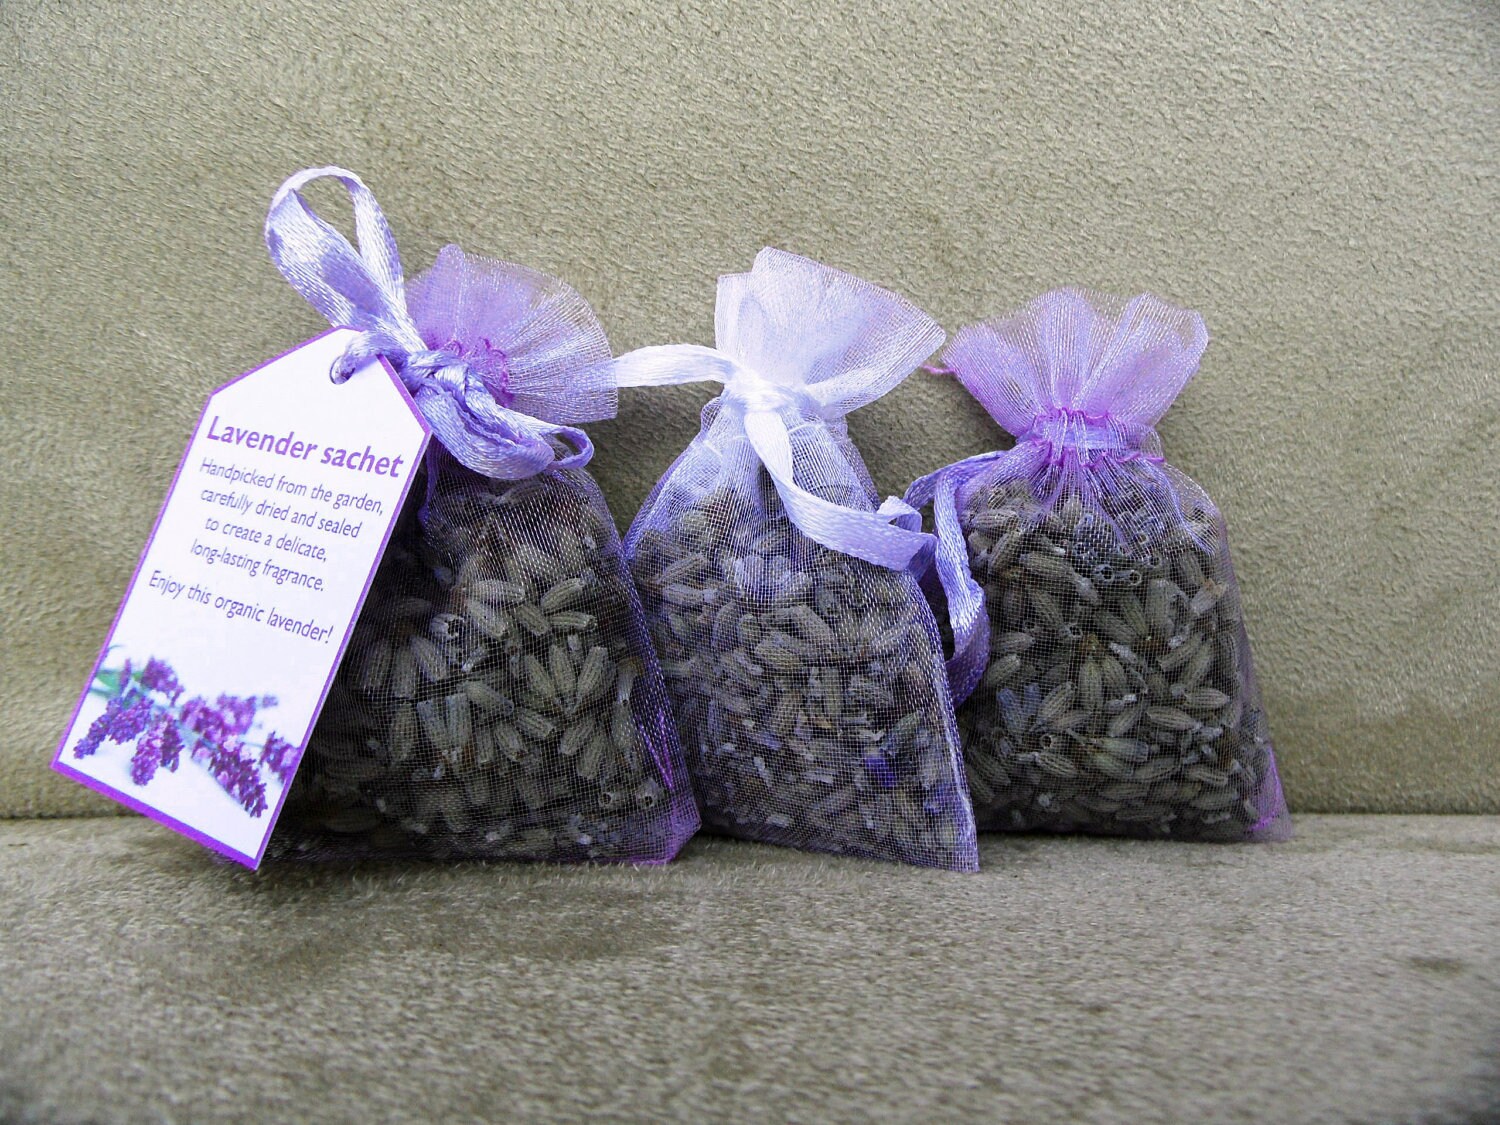 Download 3x small organic lavender sachets in organza bags hand-made